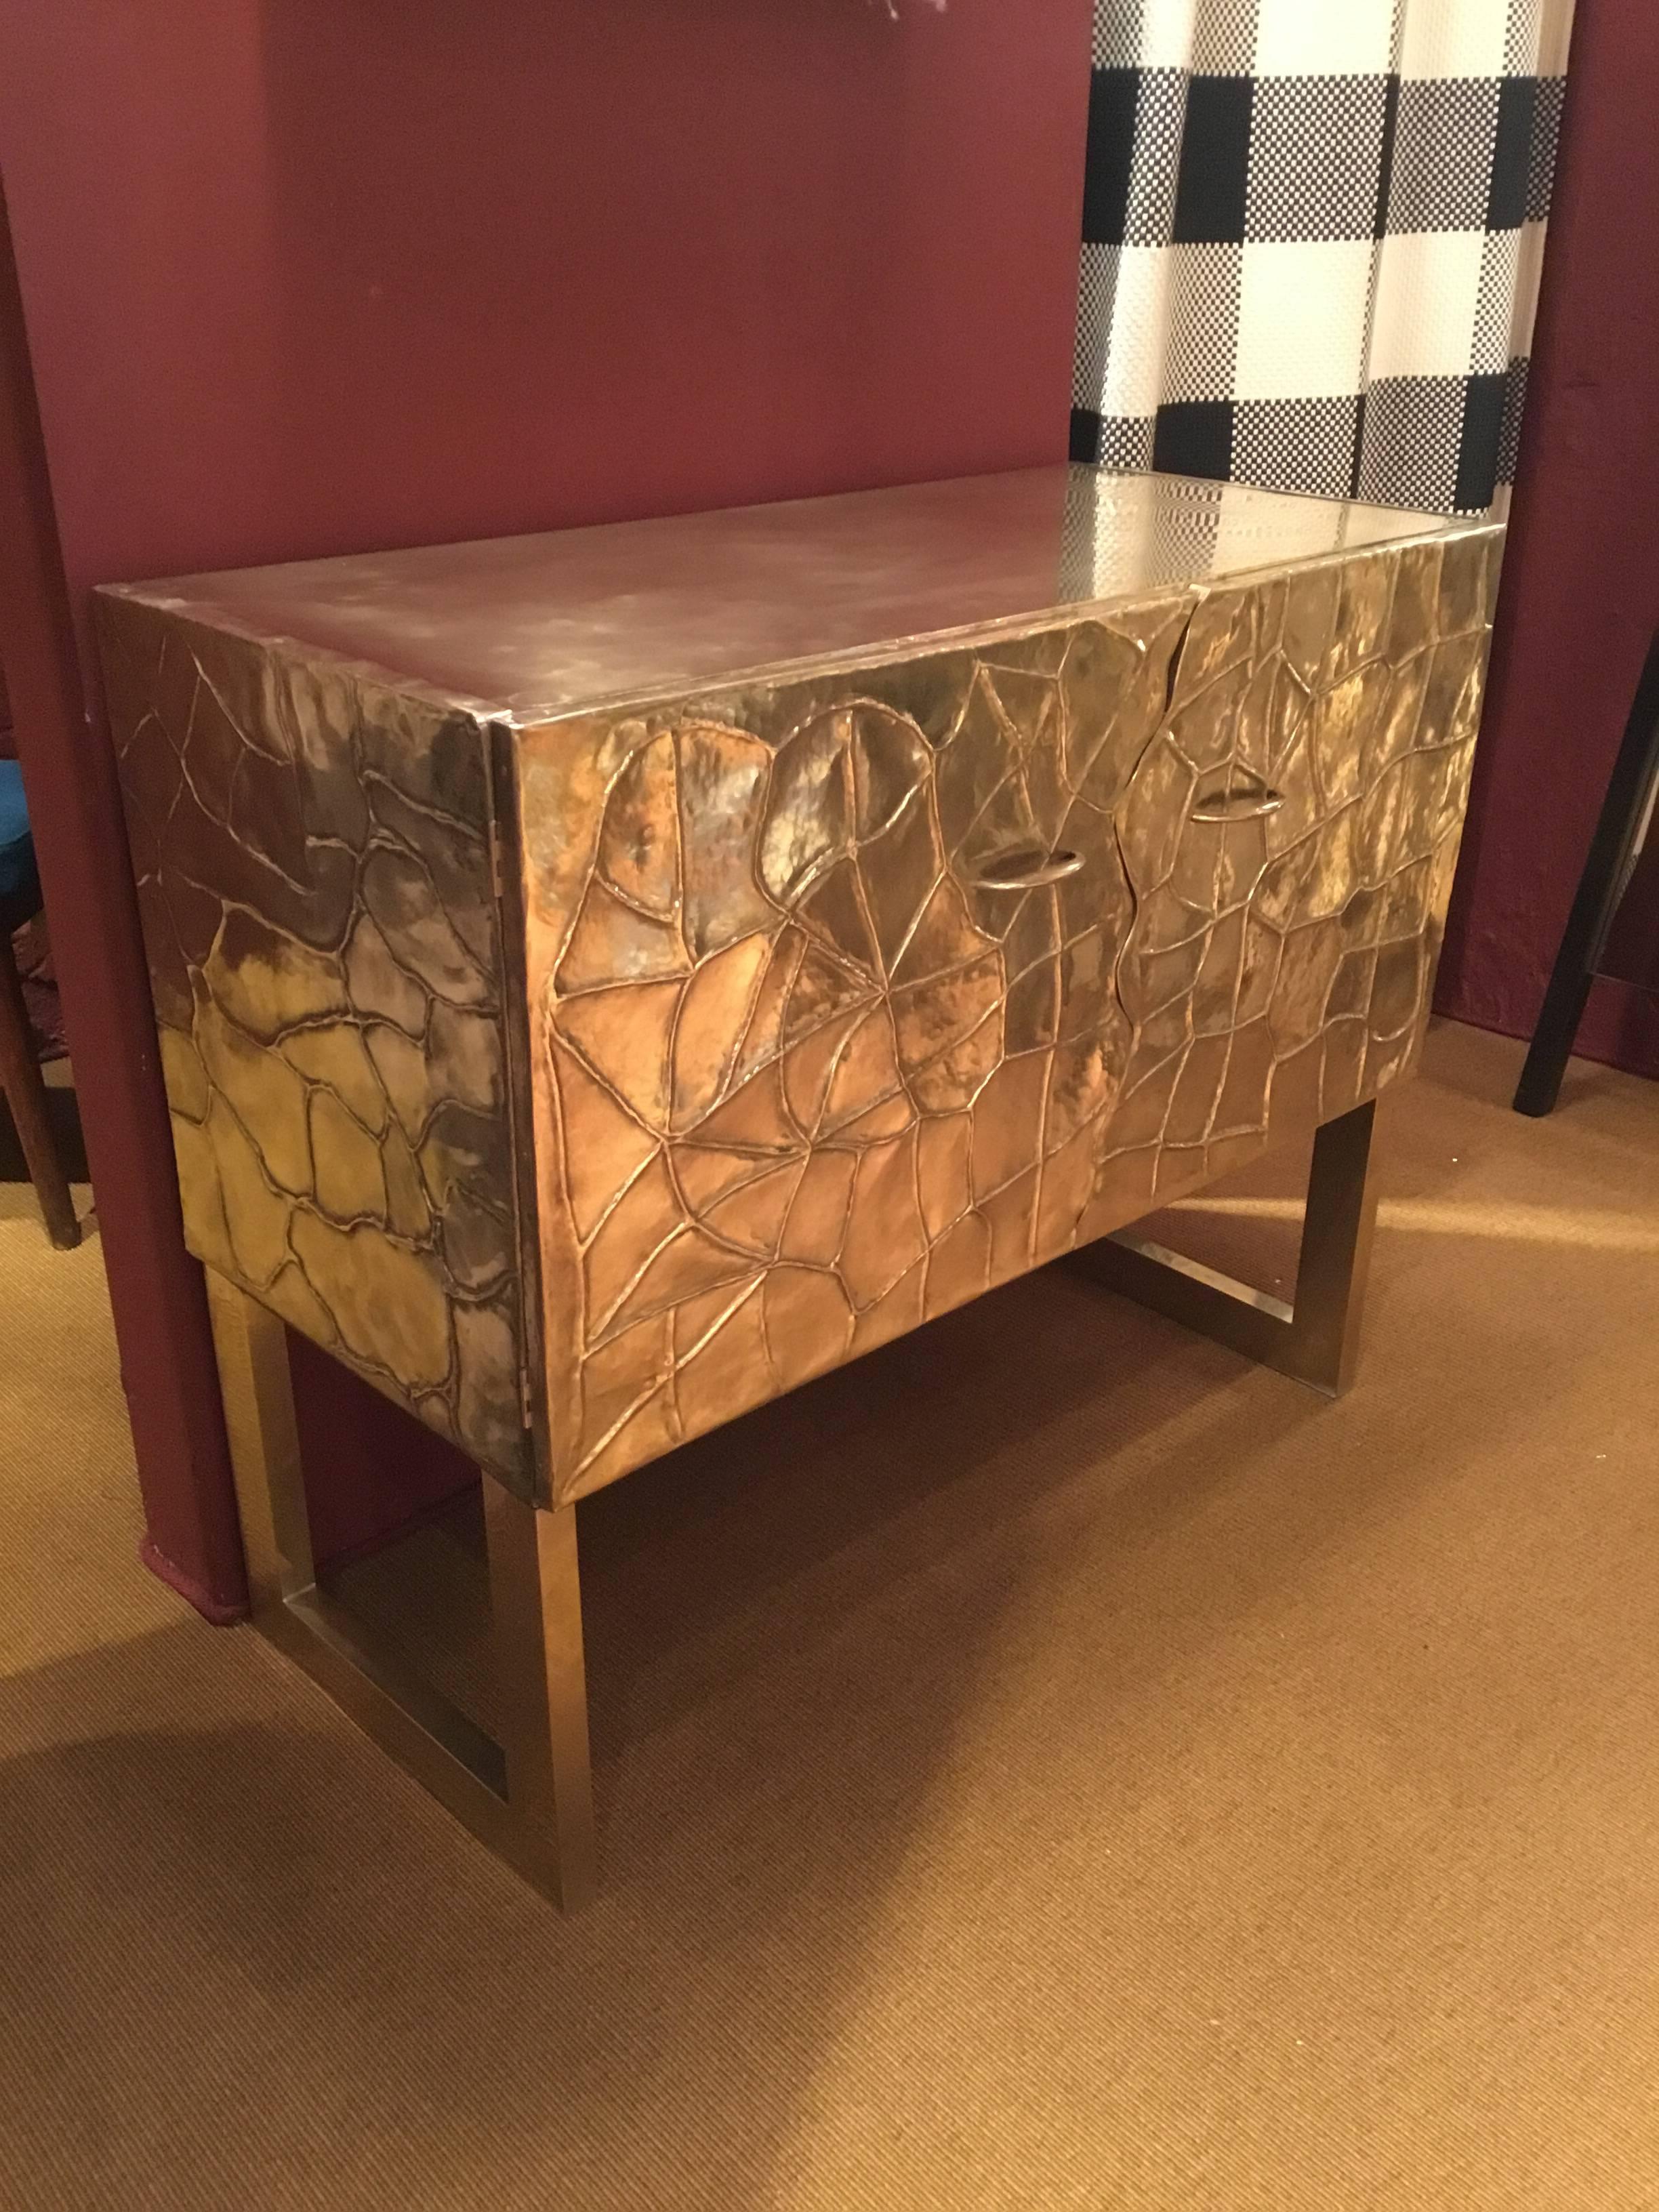 Handcrafted brass sideboard with wooden structure.

Dimensions: 46.5 x 100 x H 86 cm.